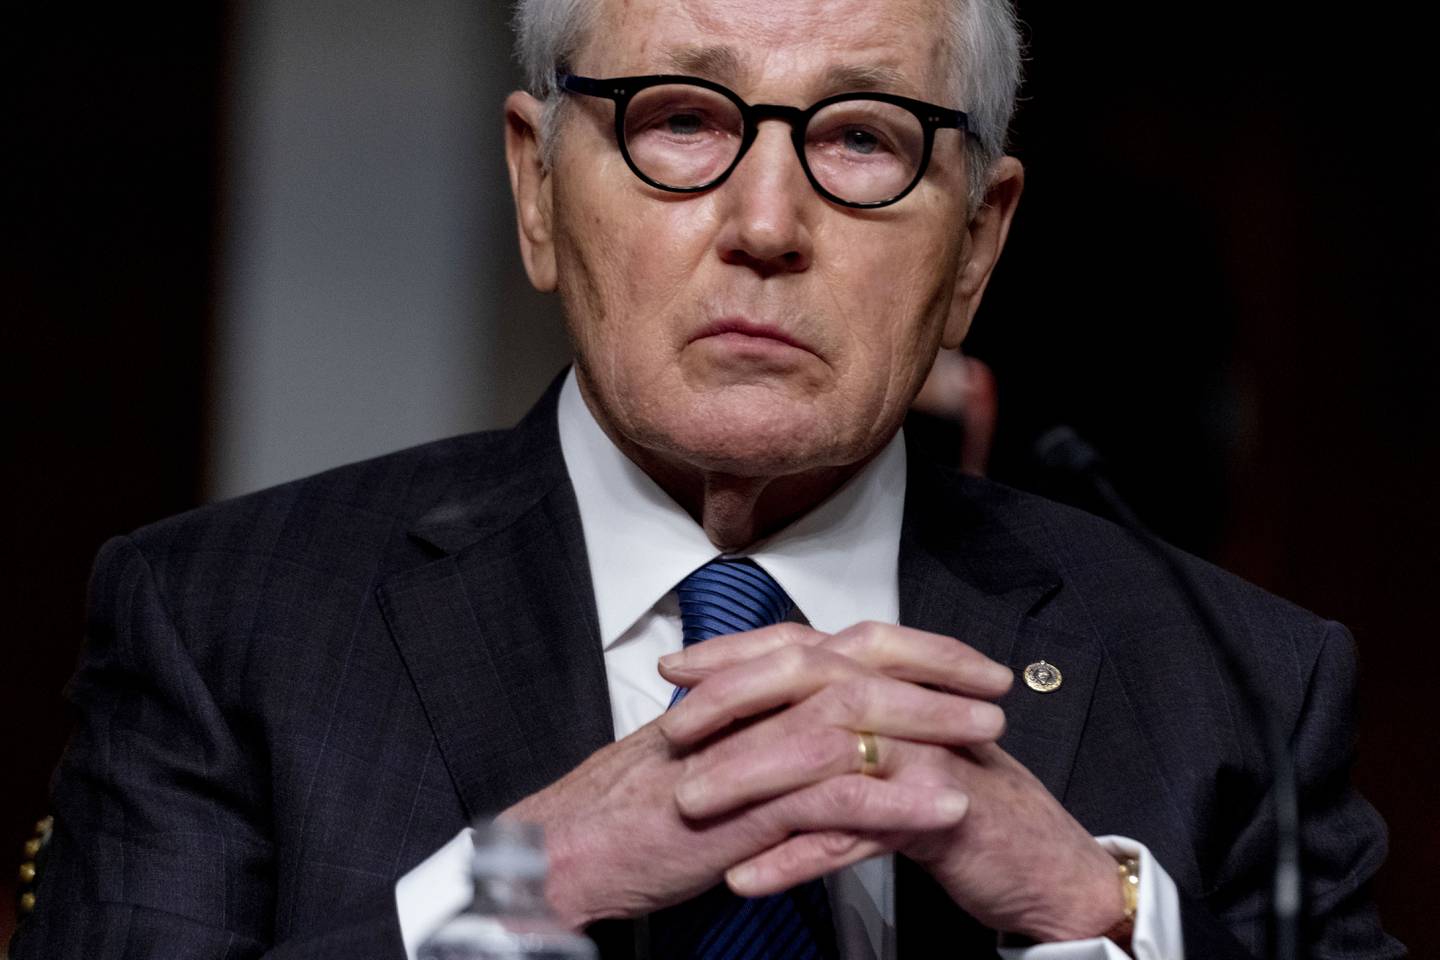 Former Secretary of Defense Chuck Hagel appears to introduce nominee to be Secretary of the Army Christine Elizabeth Wormuth at a Senate Armed Services Committee nomination hearing in Washington, May 13, 2021.